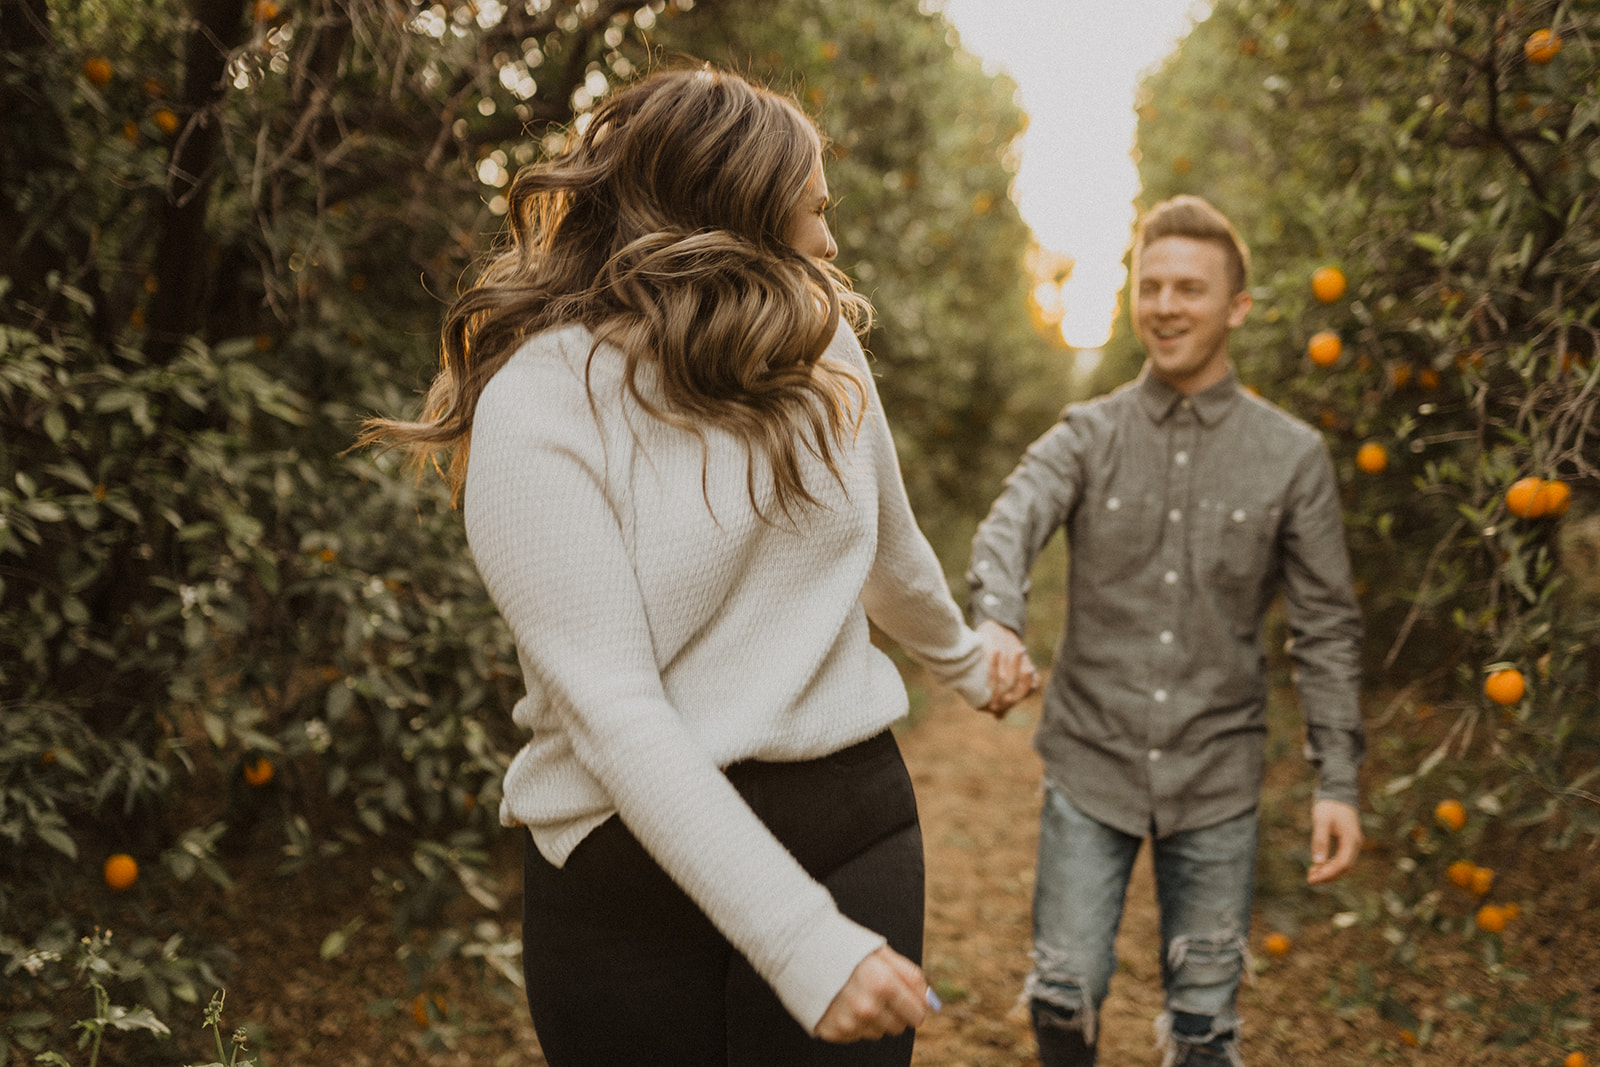 Engagement Picture in an Orange Grove